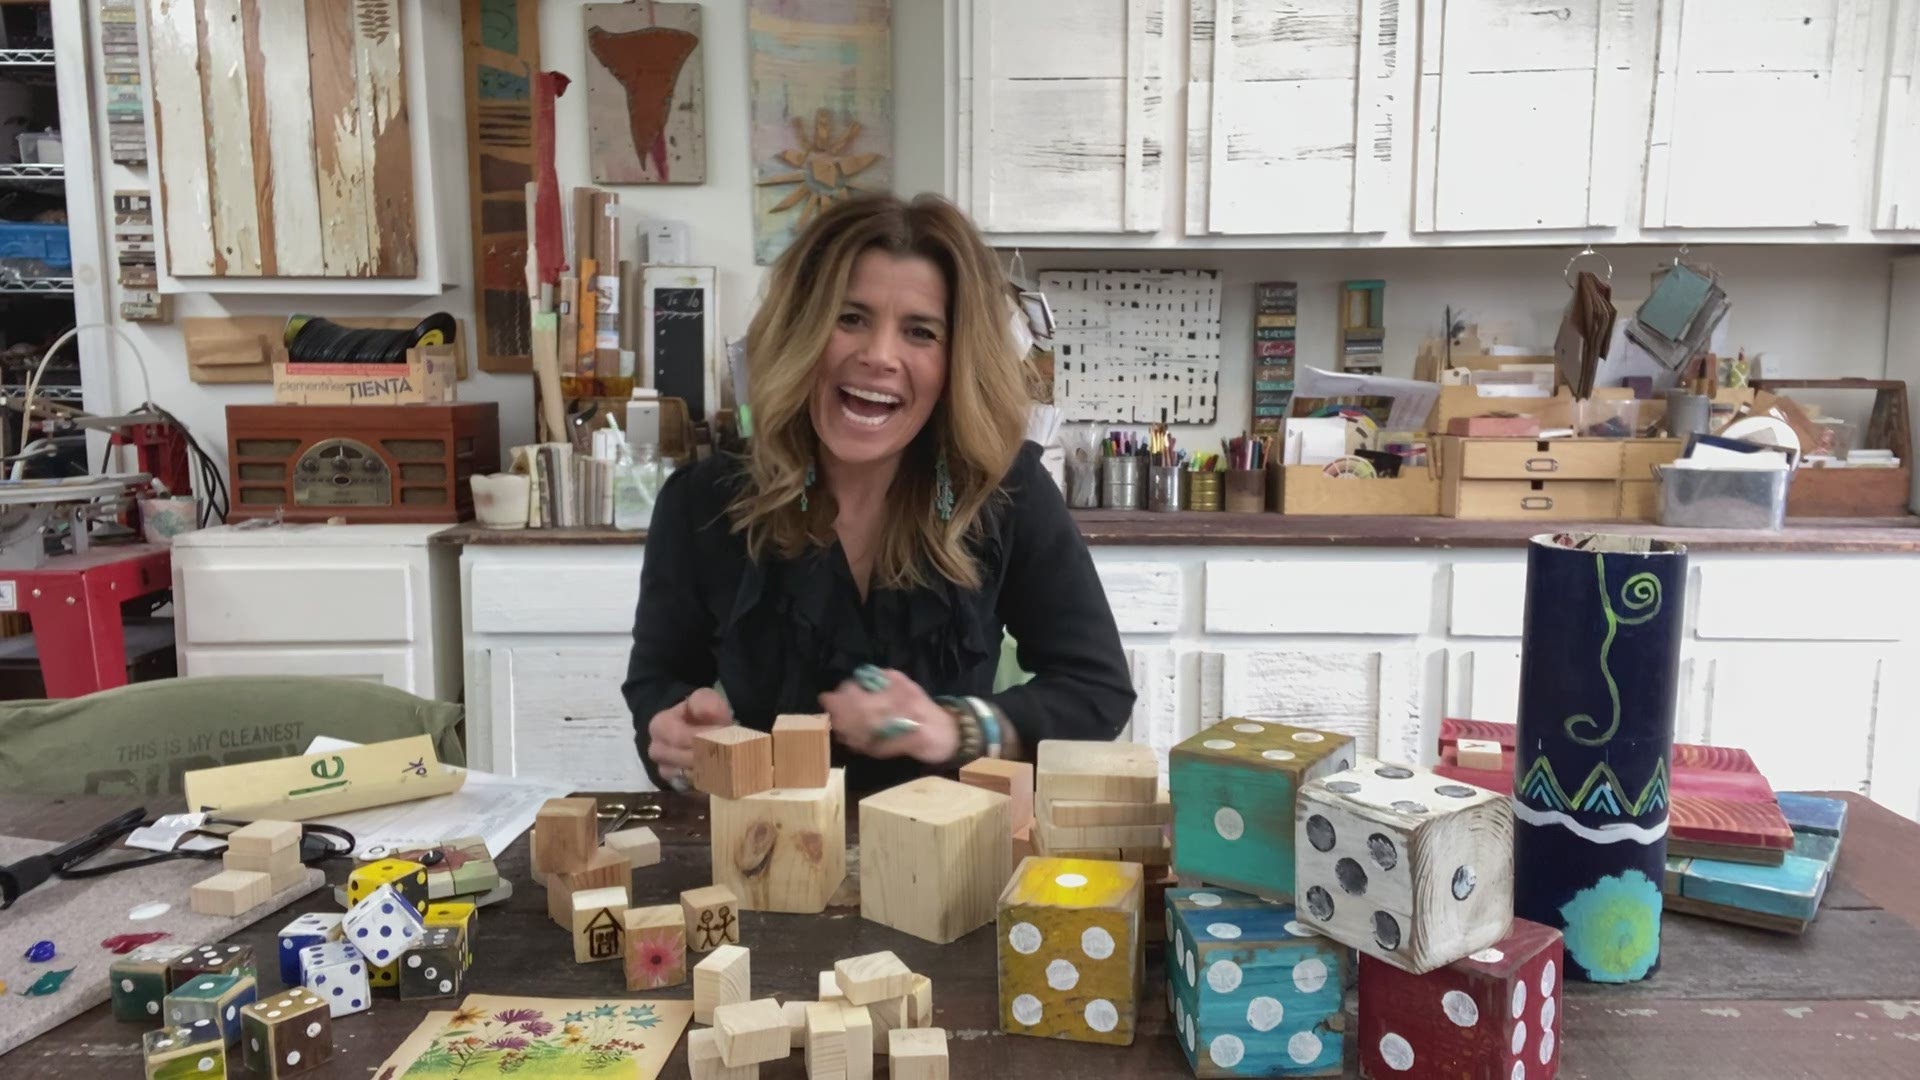 Are you playing a few more games at your house these days? Michele Brown shows us how playing games can help us stimulate our brains and have fun!